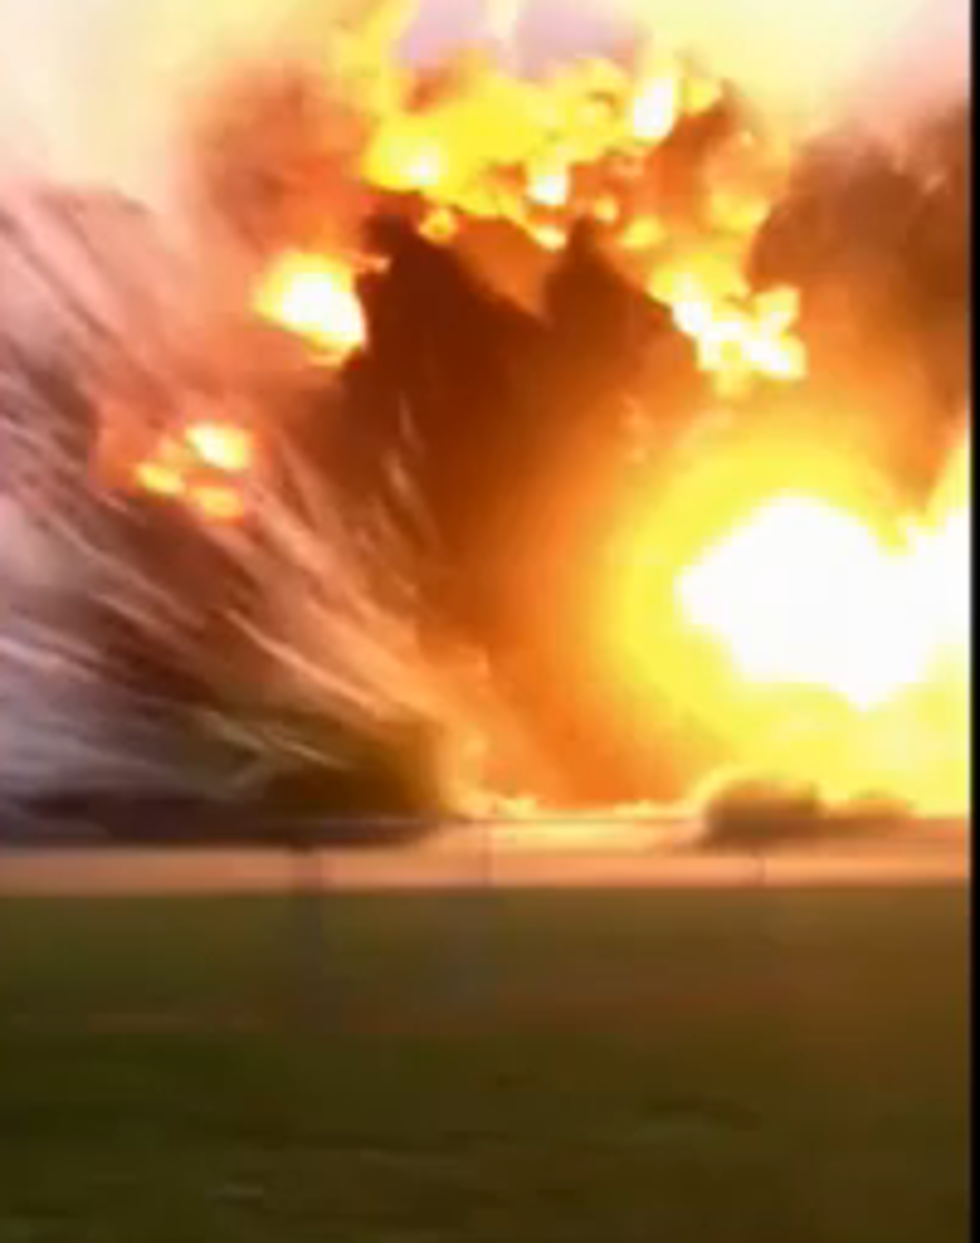 Terrifying Video Of The Fertilizer Plant Explosion In West Texas [VIDEO]